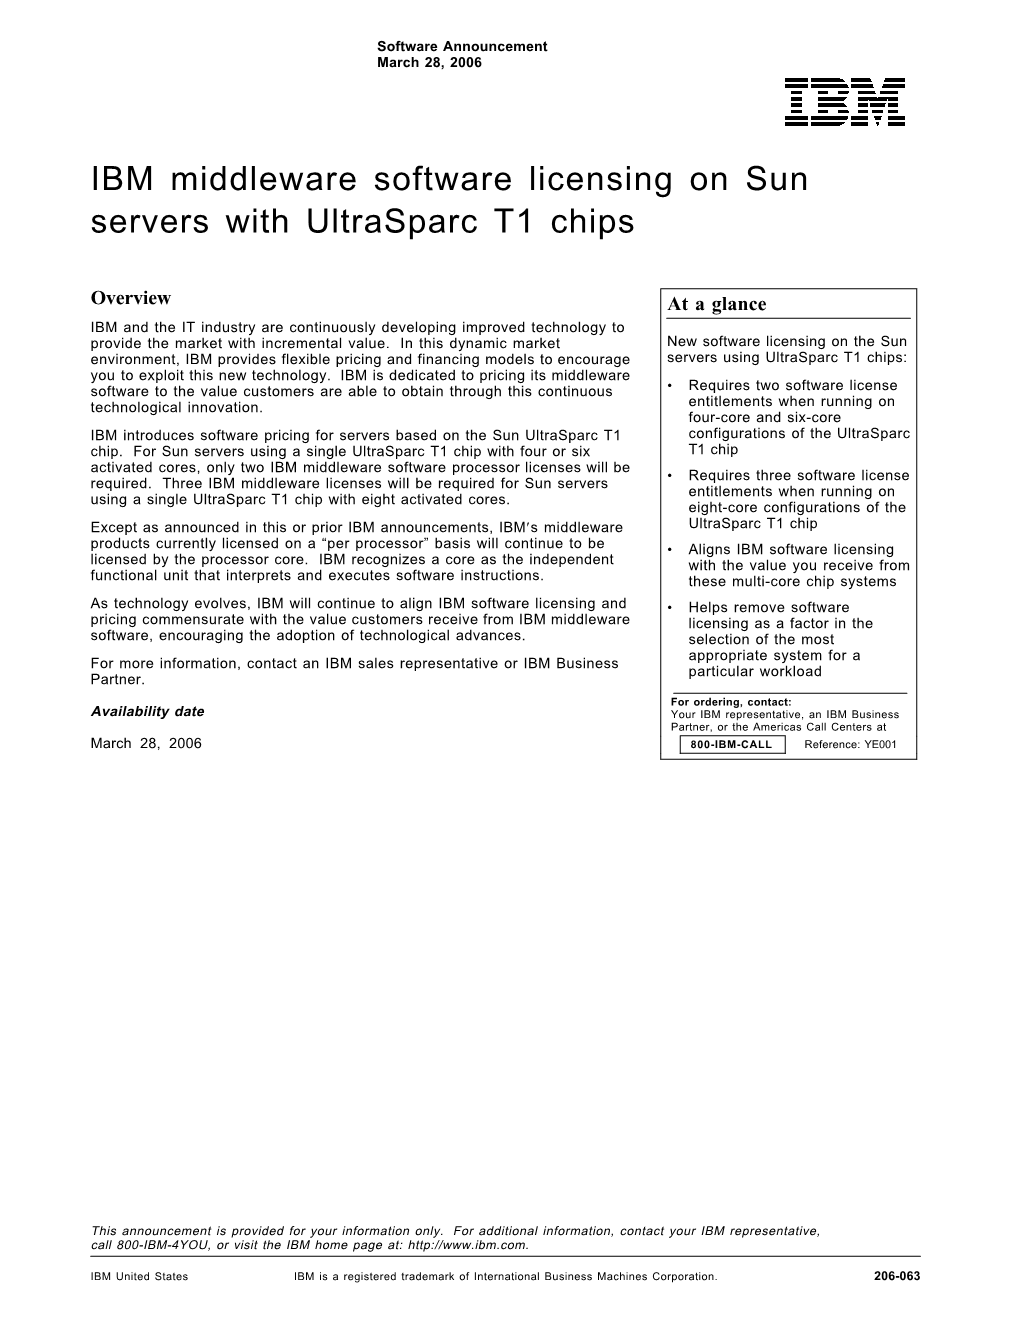 IBM Middleware Software Licensing on Sun Servers with Ultrasparc T1 Chips